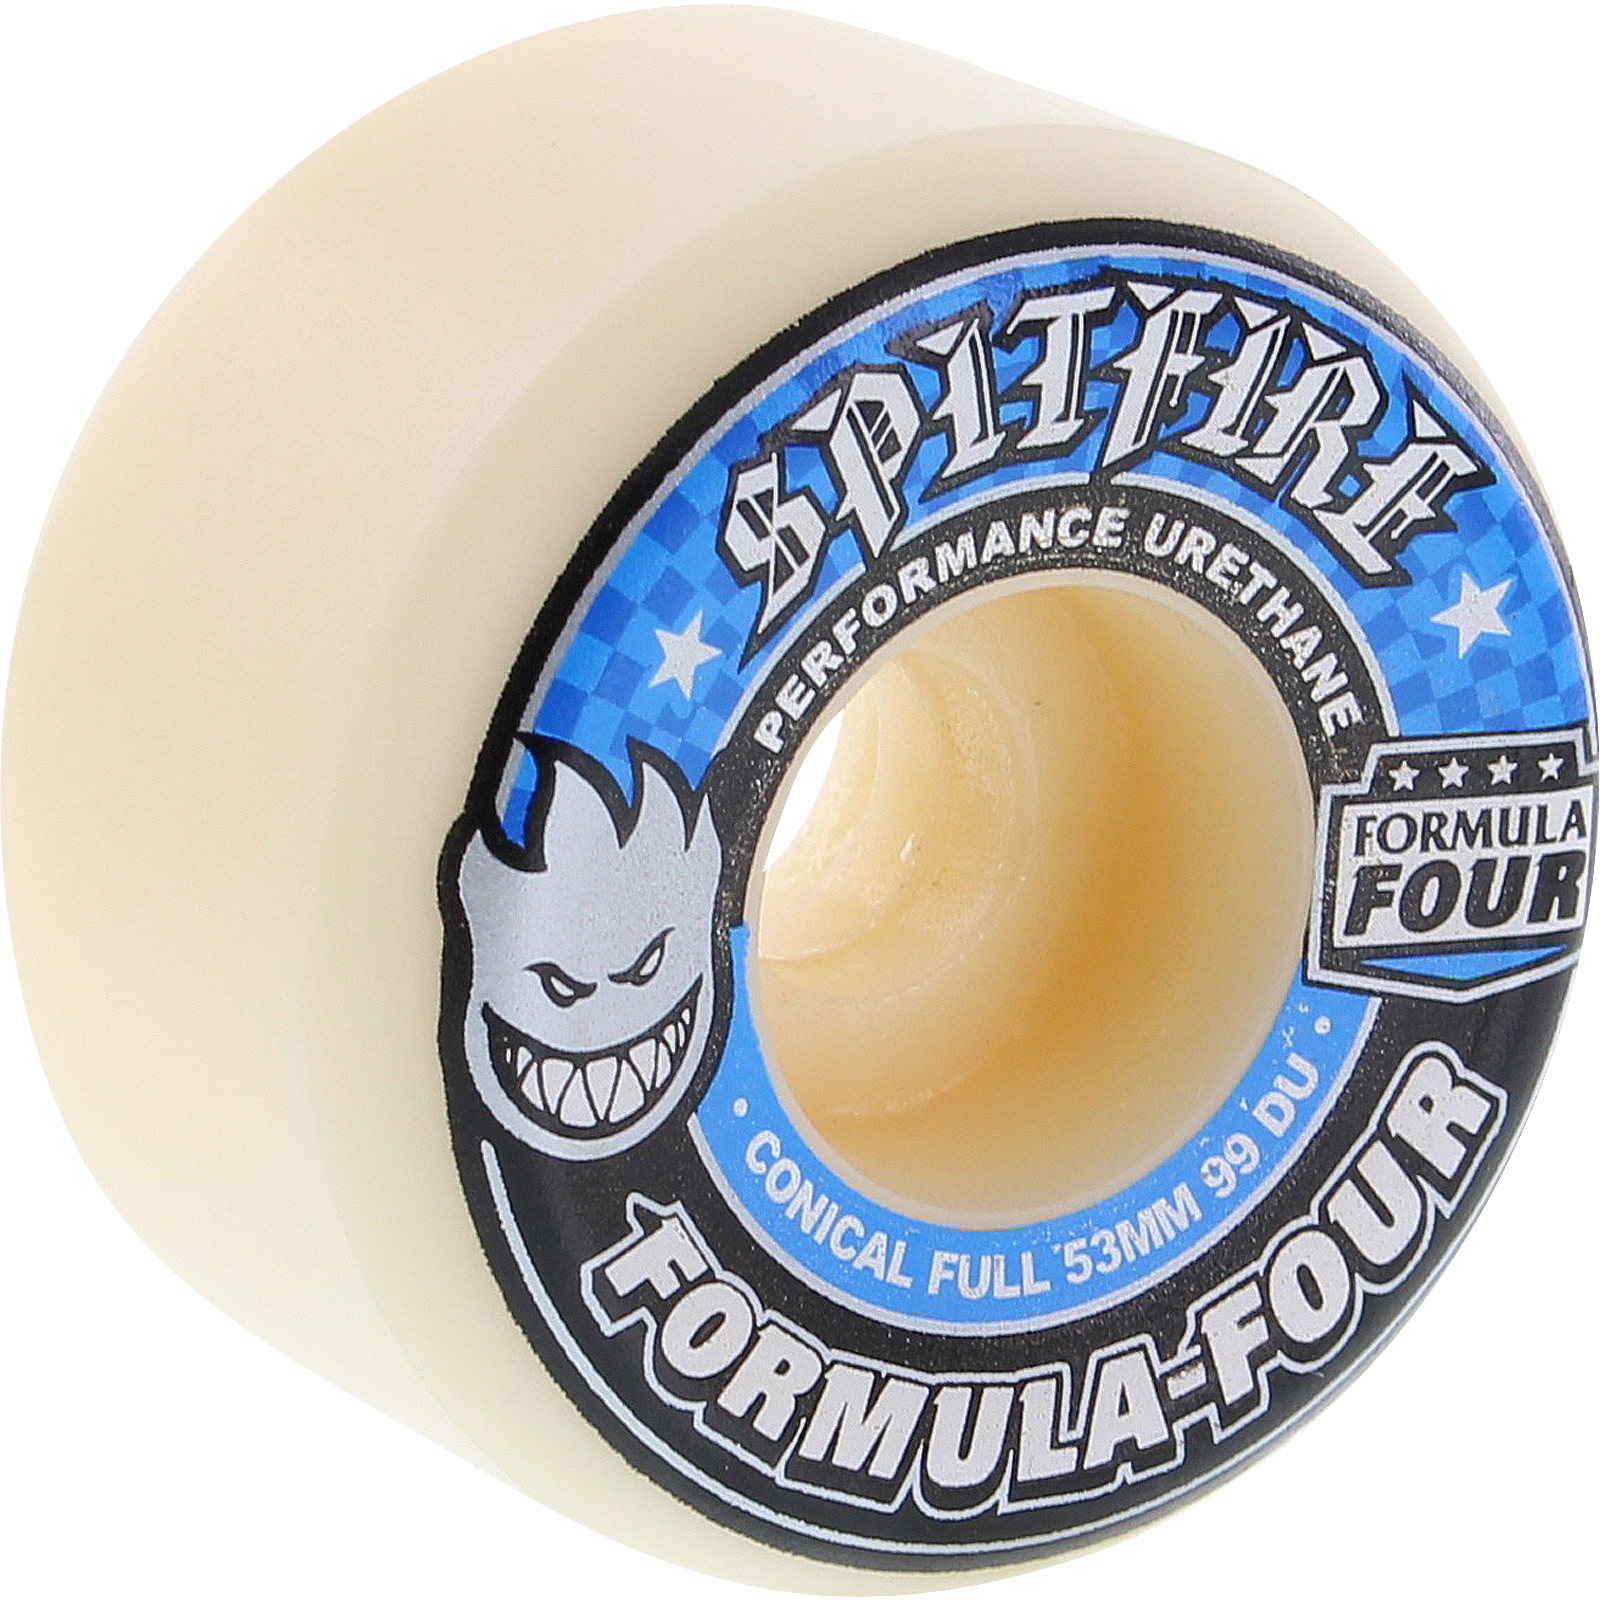 Spitfire Formula Four Conical Full Skateboard Wheels 53MM 99a Blue - Invisible Board Shop